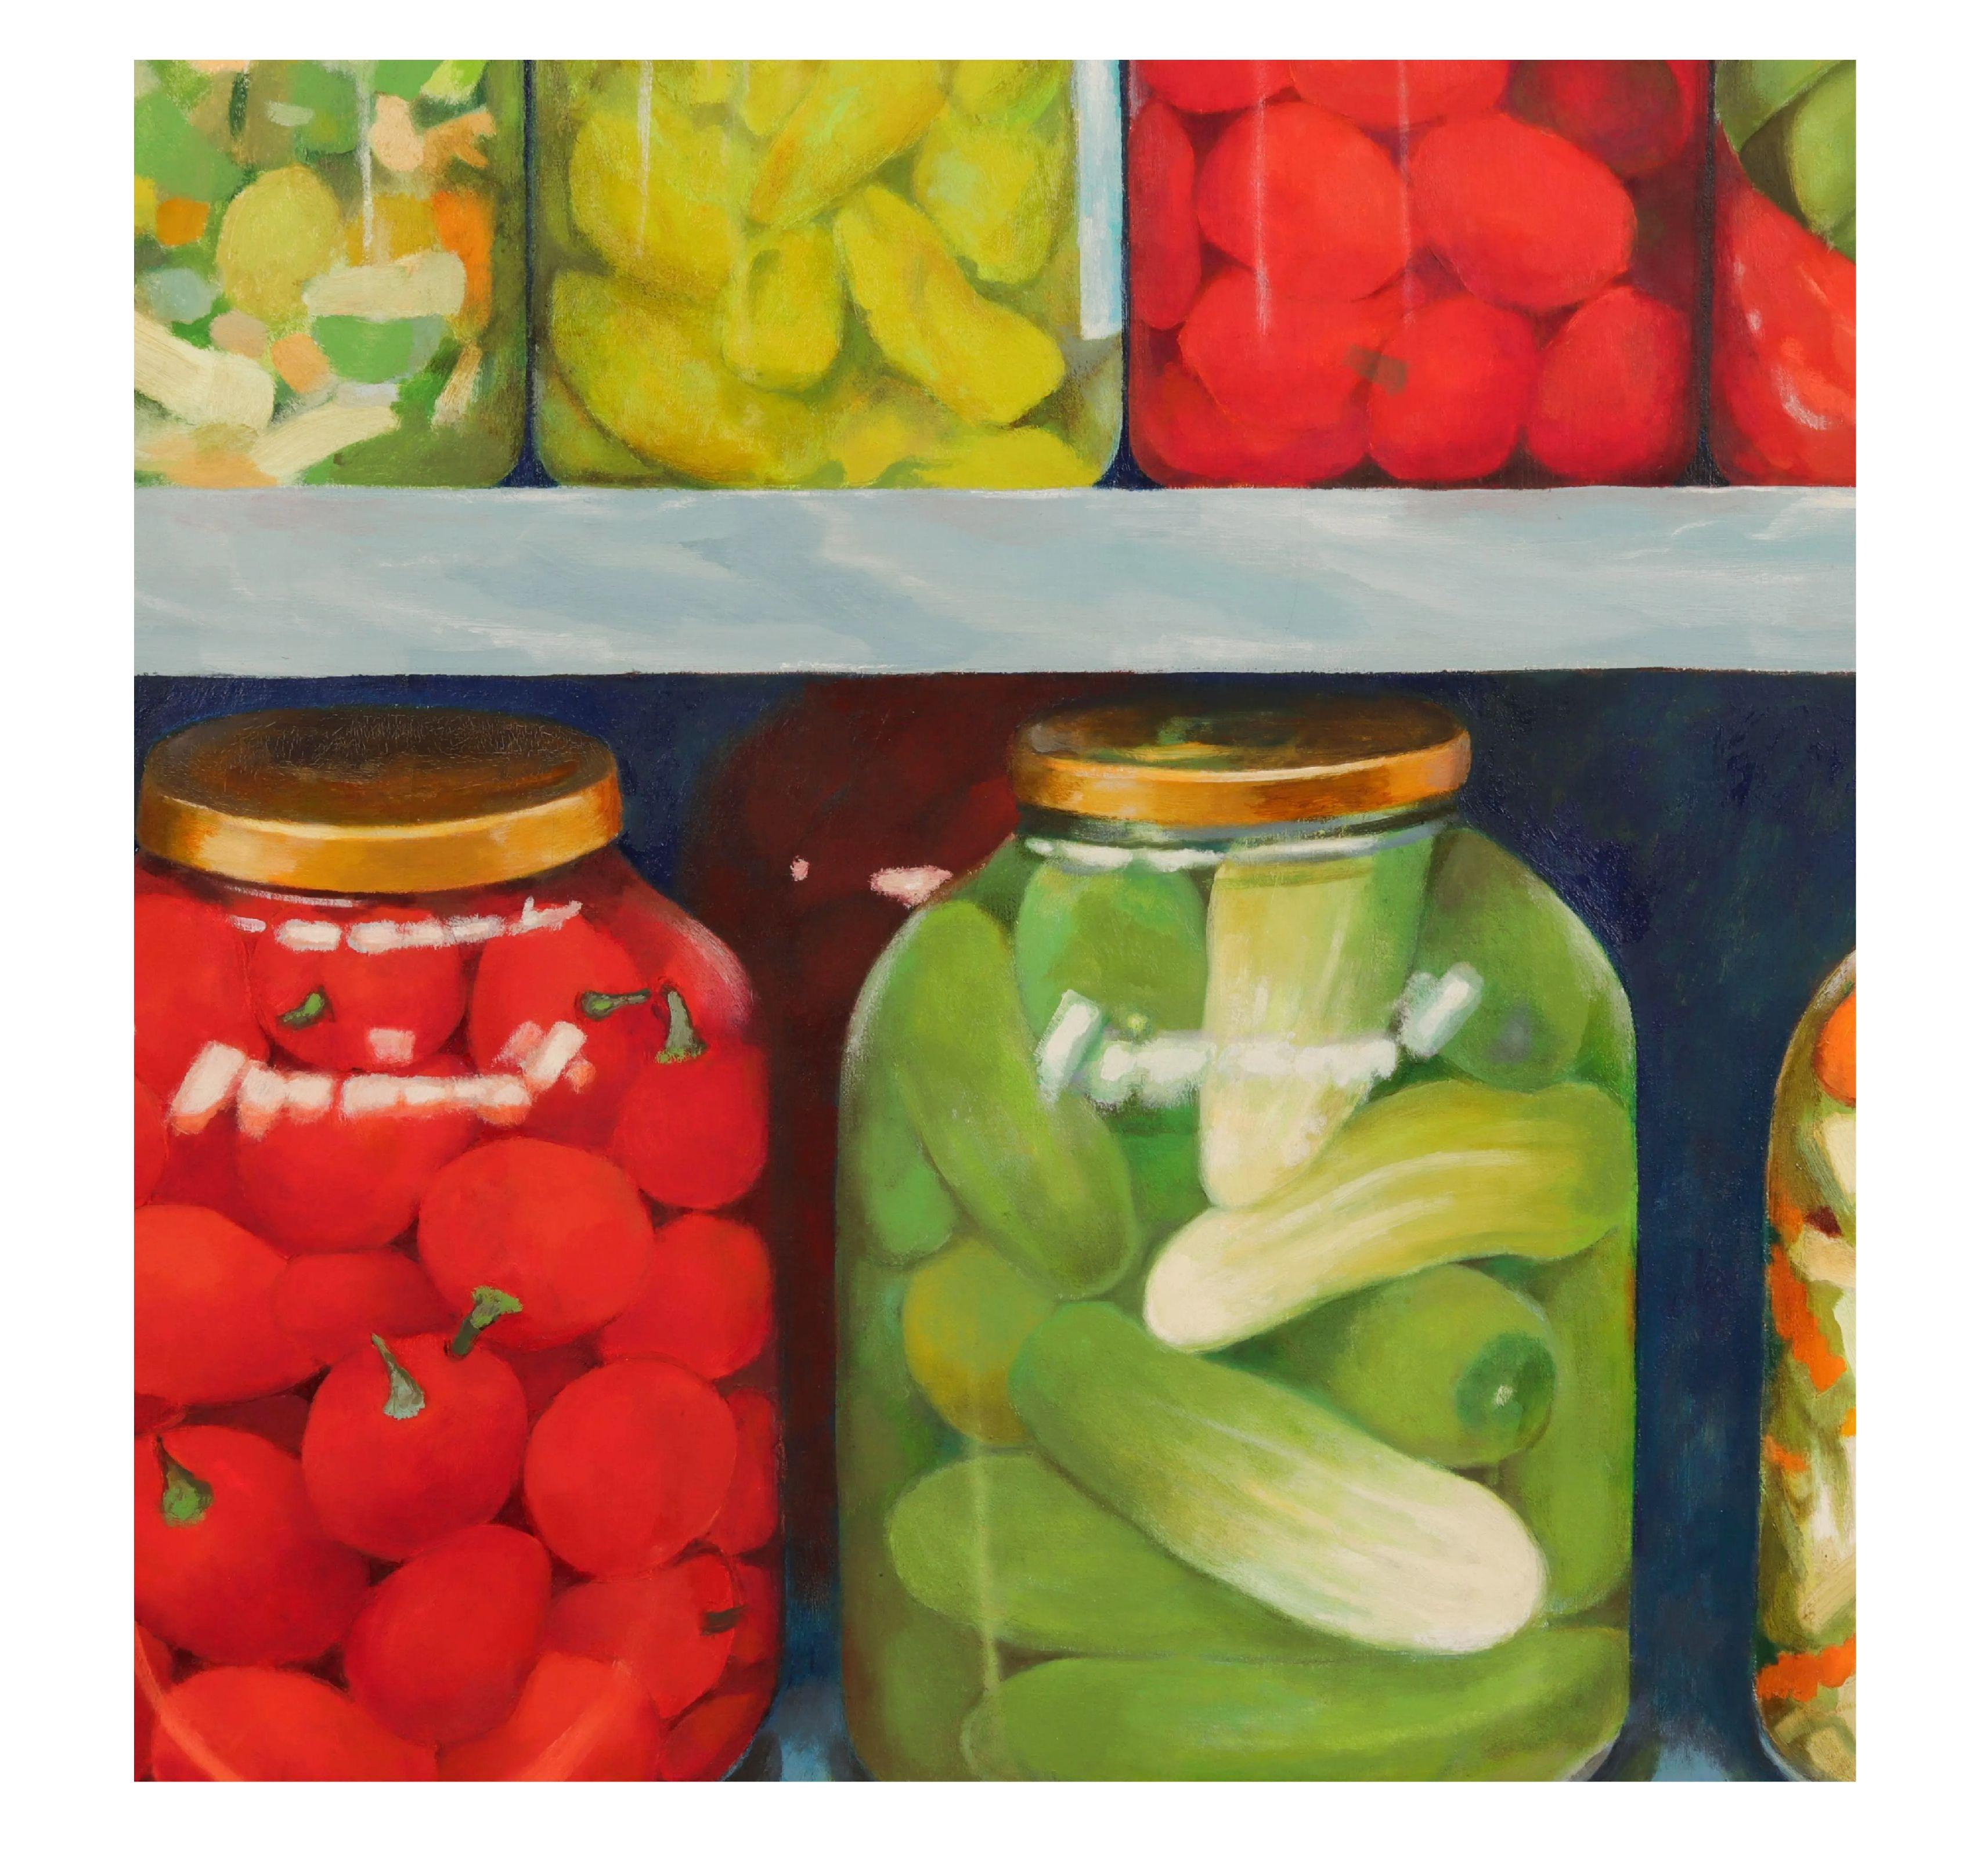 Red and green ‘Pickled’ still life by Irma Cavat, 1983, oil on canvas painting, signed Cavat lower right.
Provenance: 
Private Collection, New York.
Kennedy Galleries, 730 5th Avenue, NY, NY

Literature: Deak, Gloria-Gilda, ‘Irma Cavat, Recent